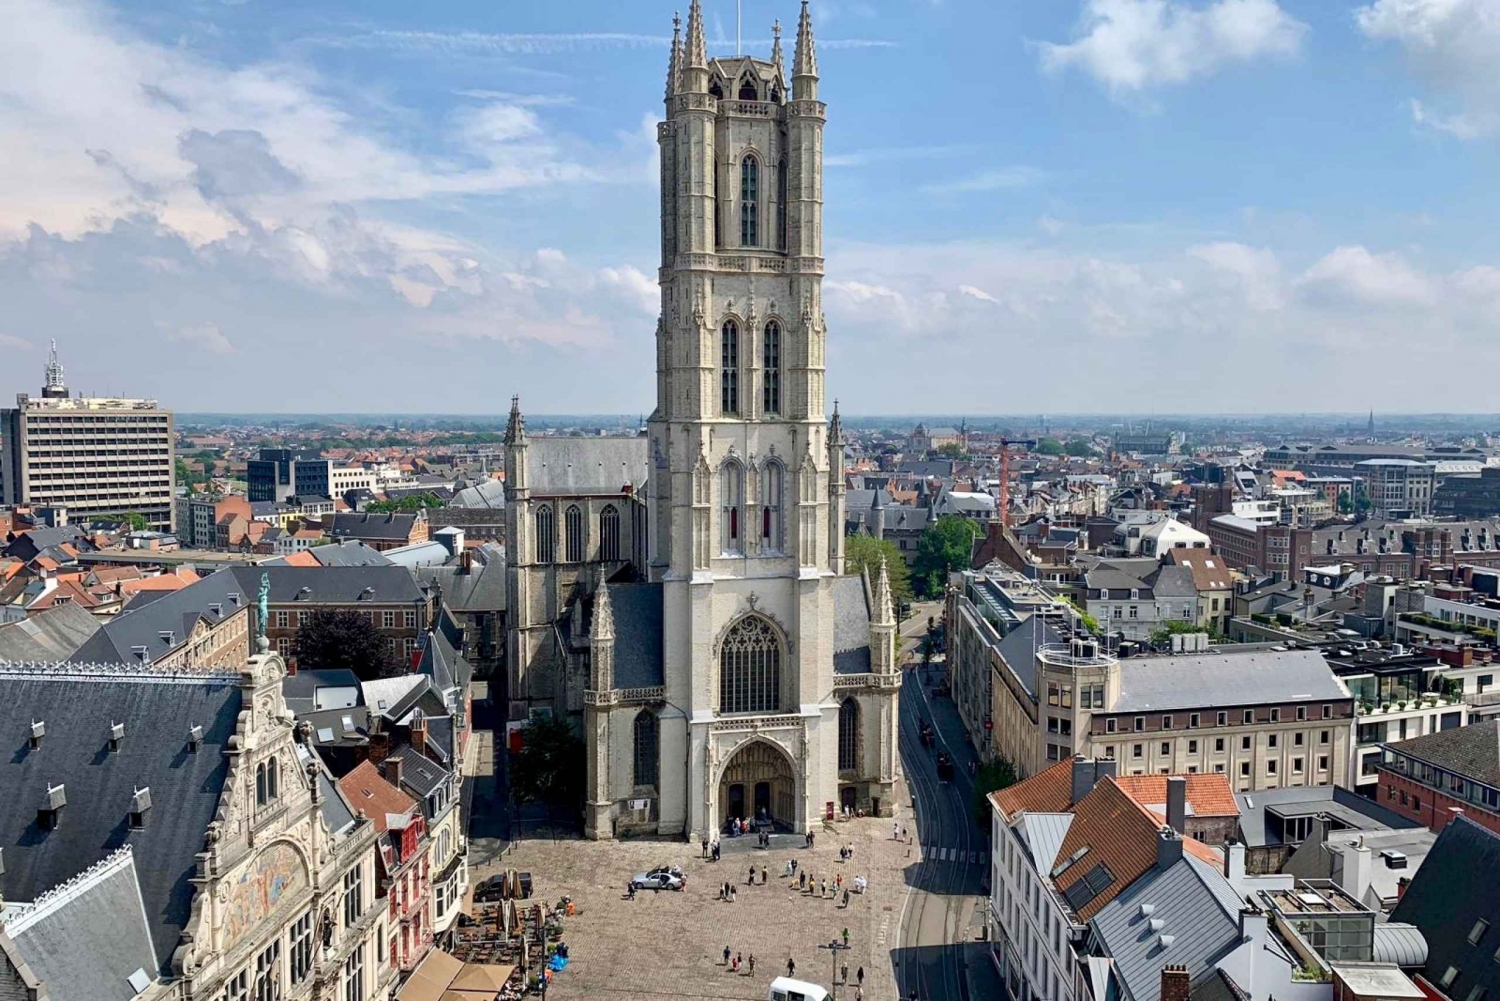 From the Netherlands: Full-Day Tour to Ghent